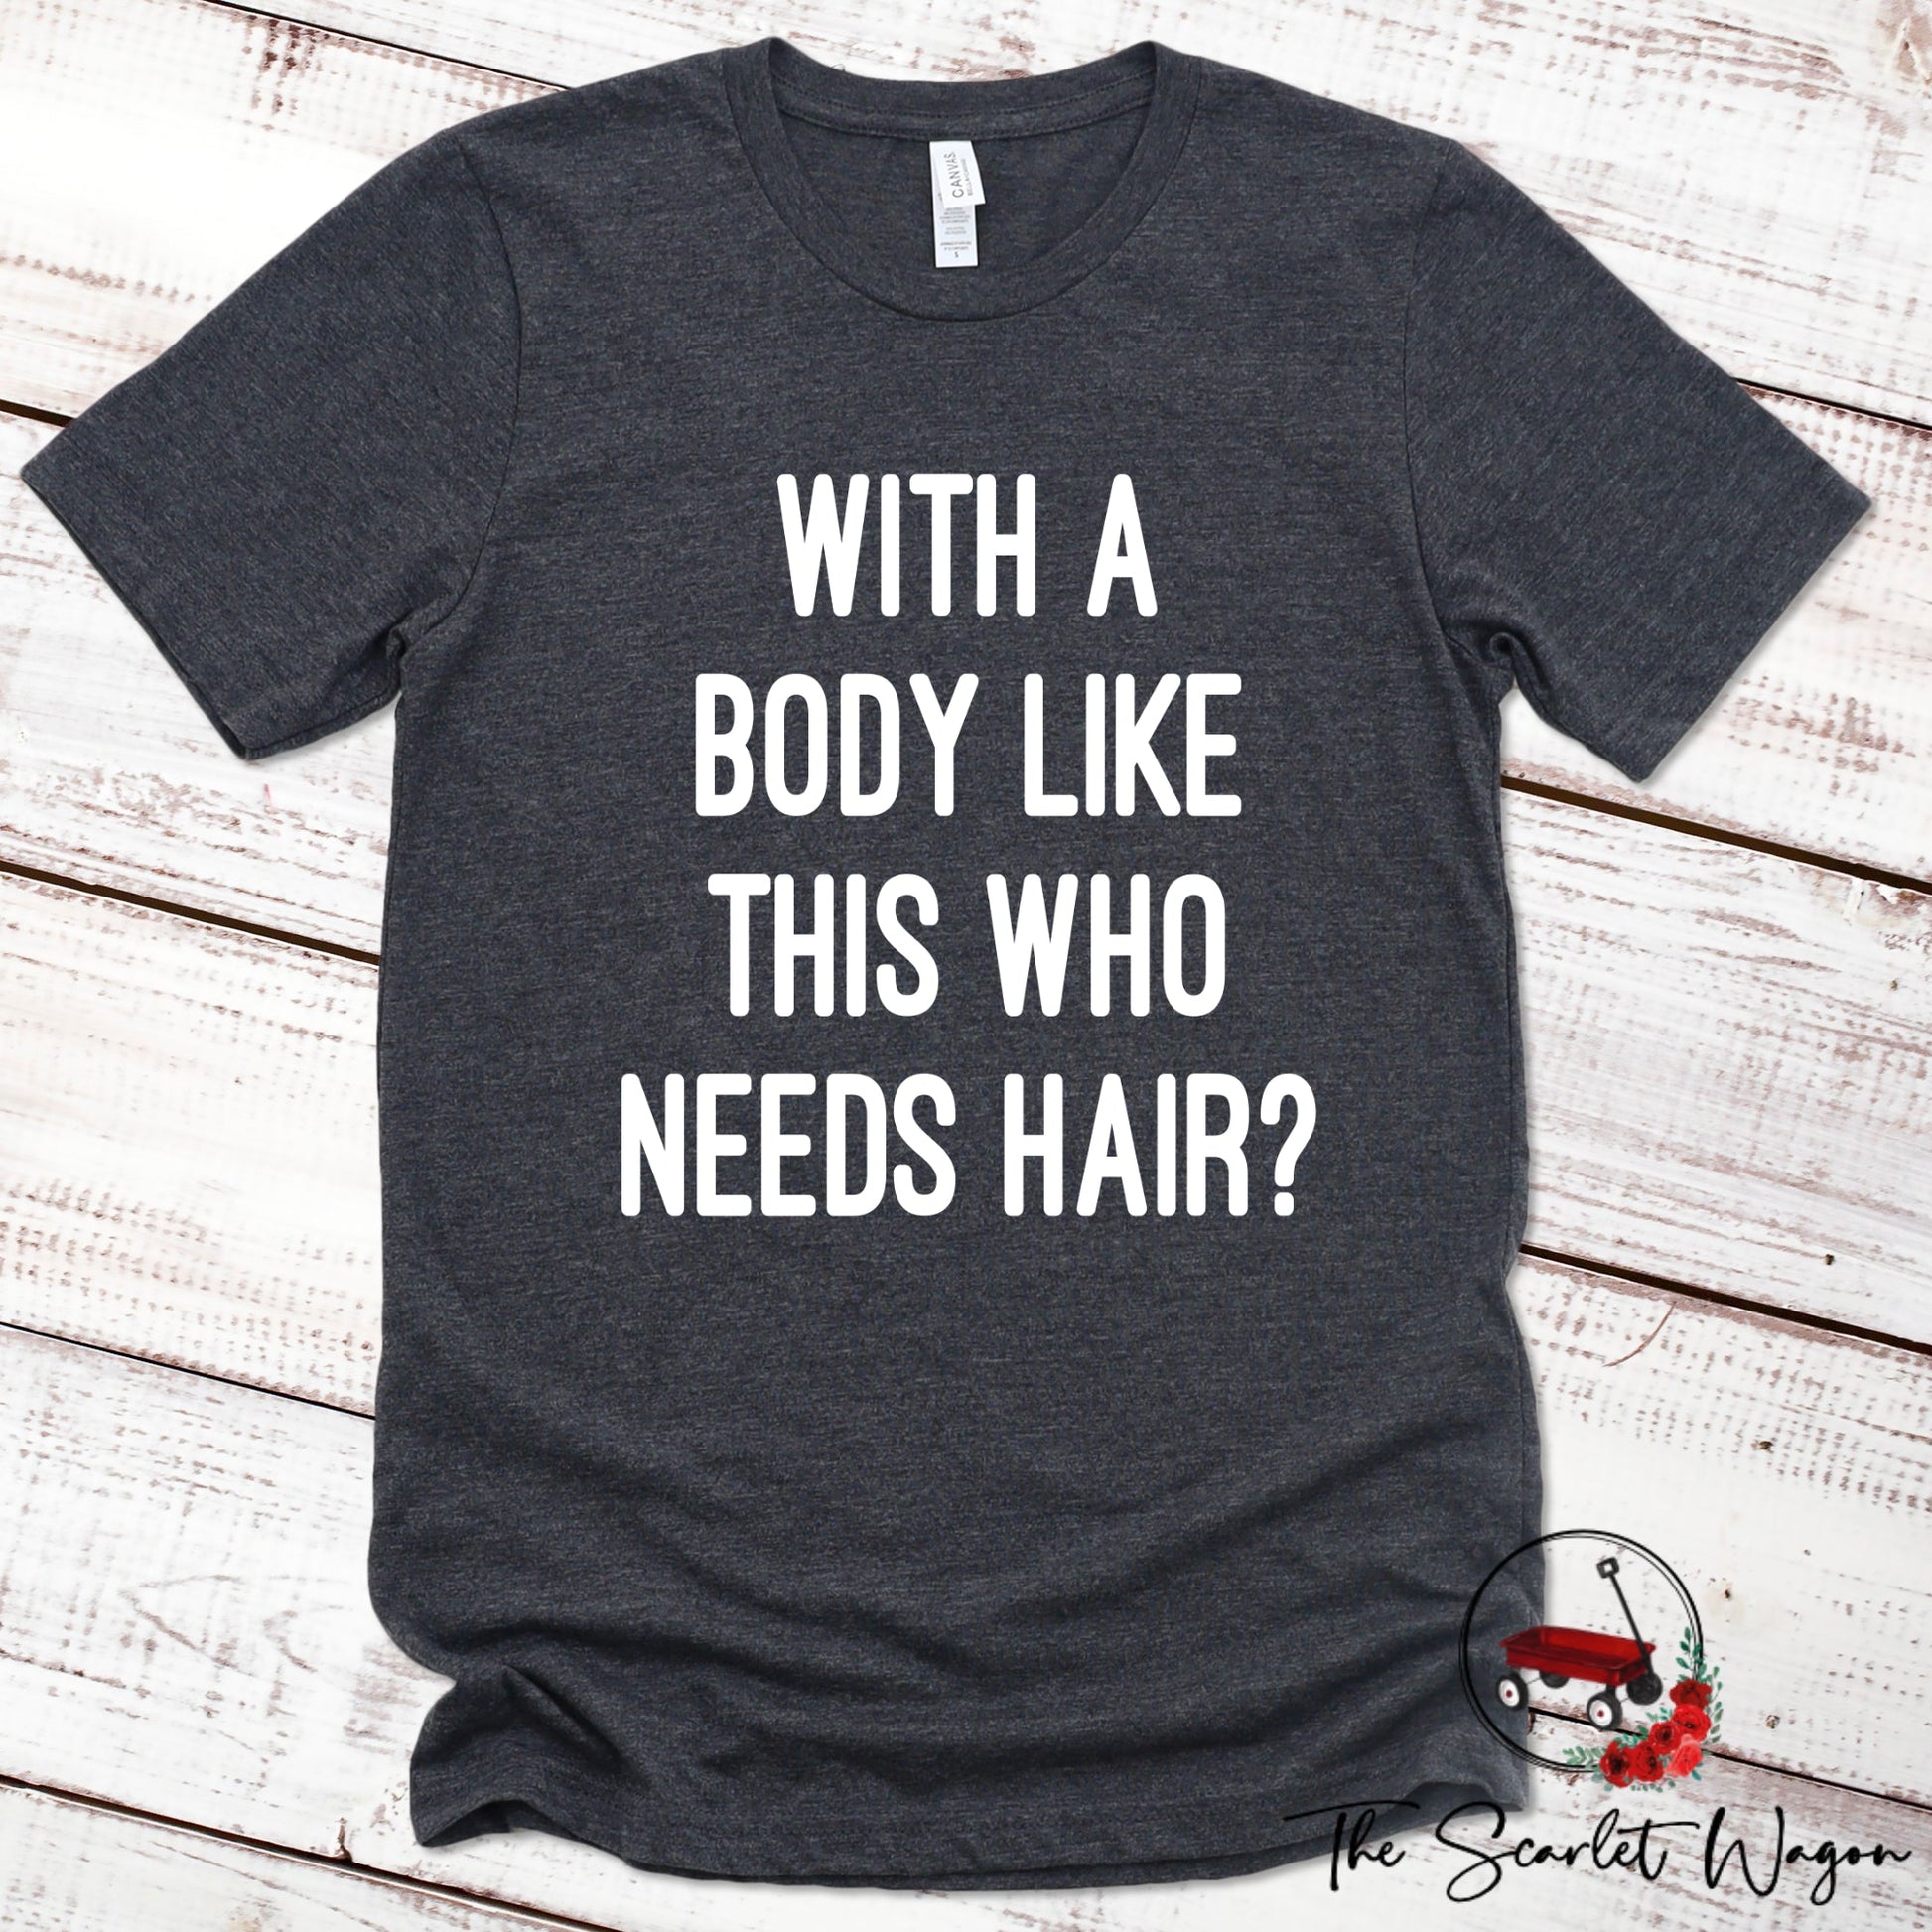 With a Body Like This Who Needs Hair Premium Tee Scarlet Wagon Dark Gray Heather XS 